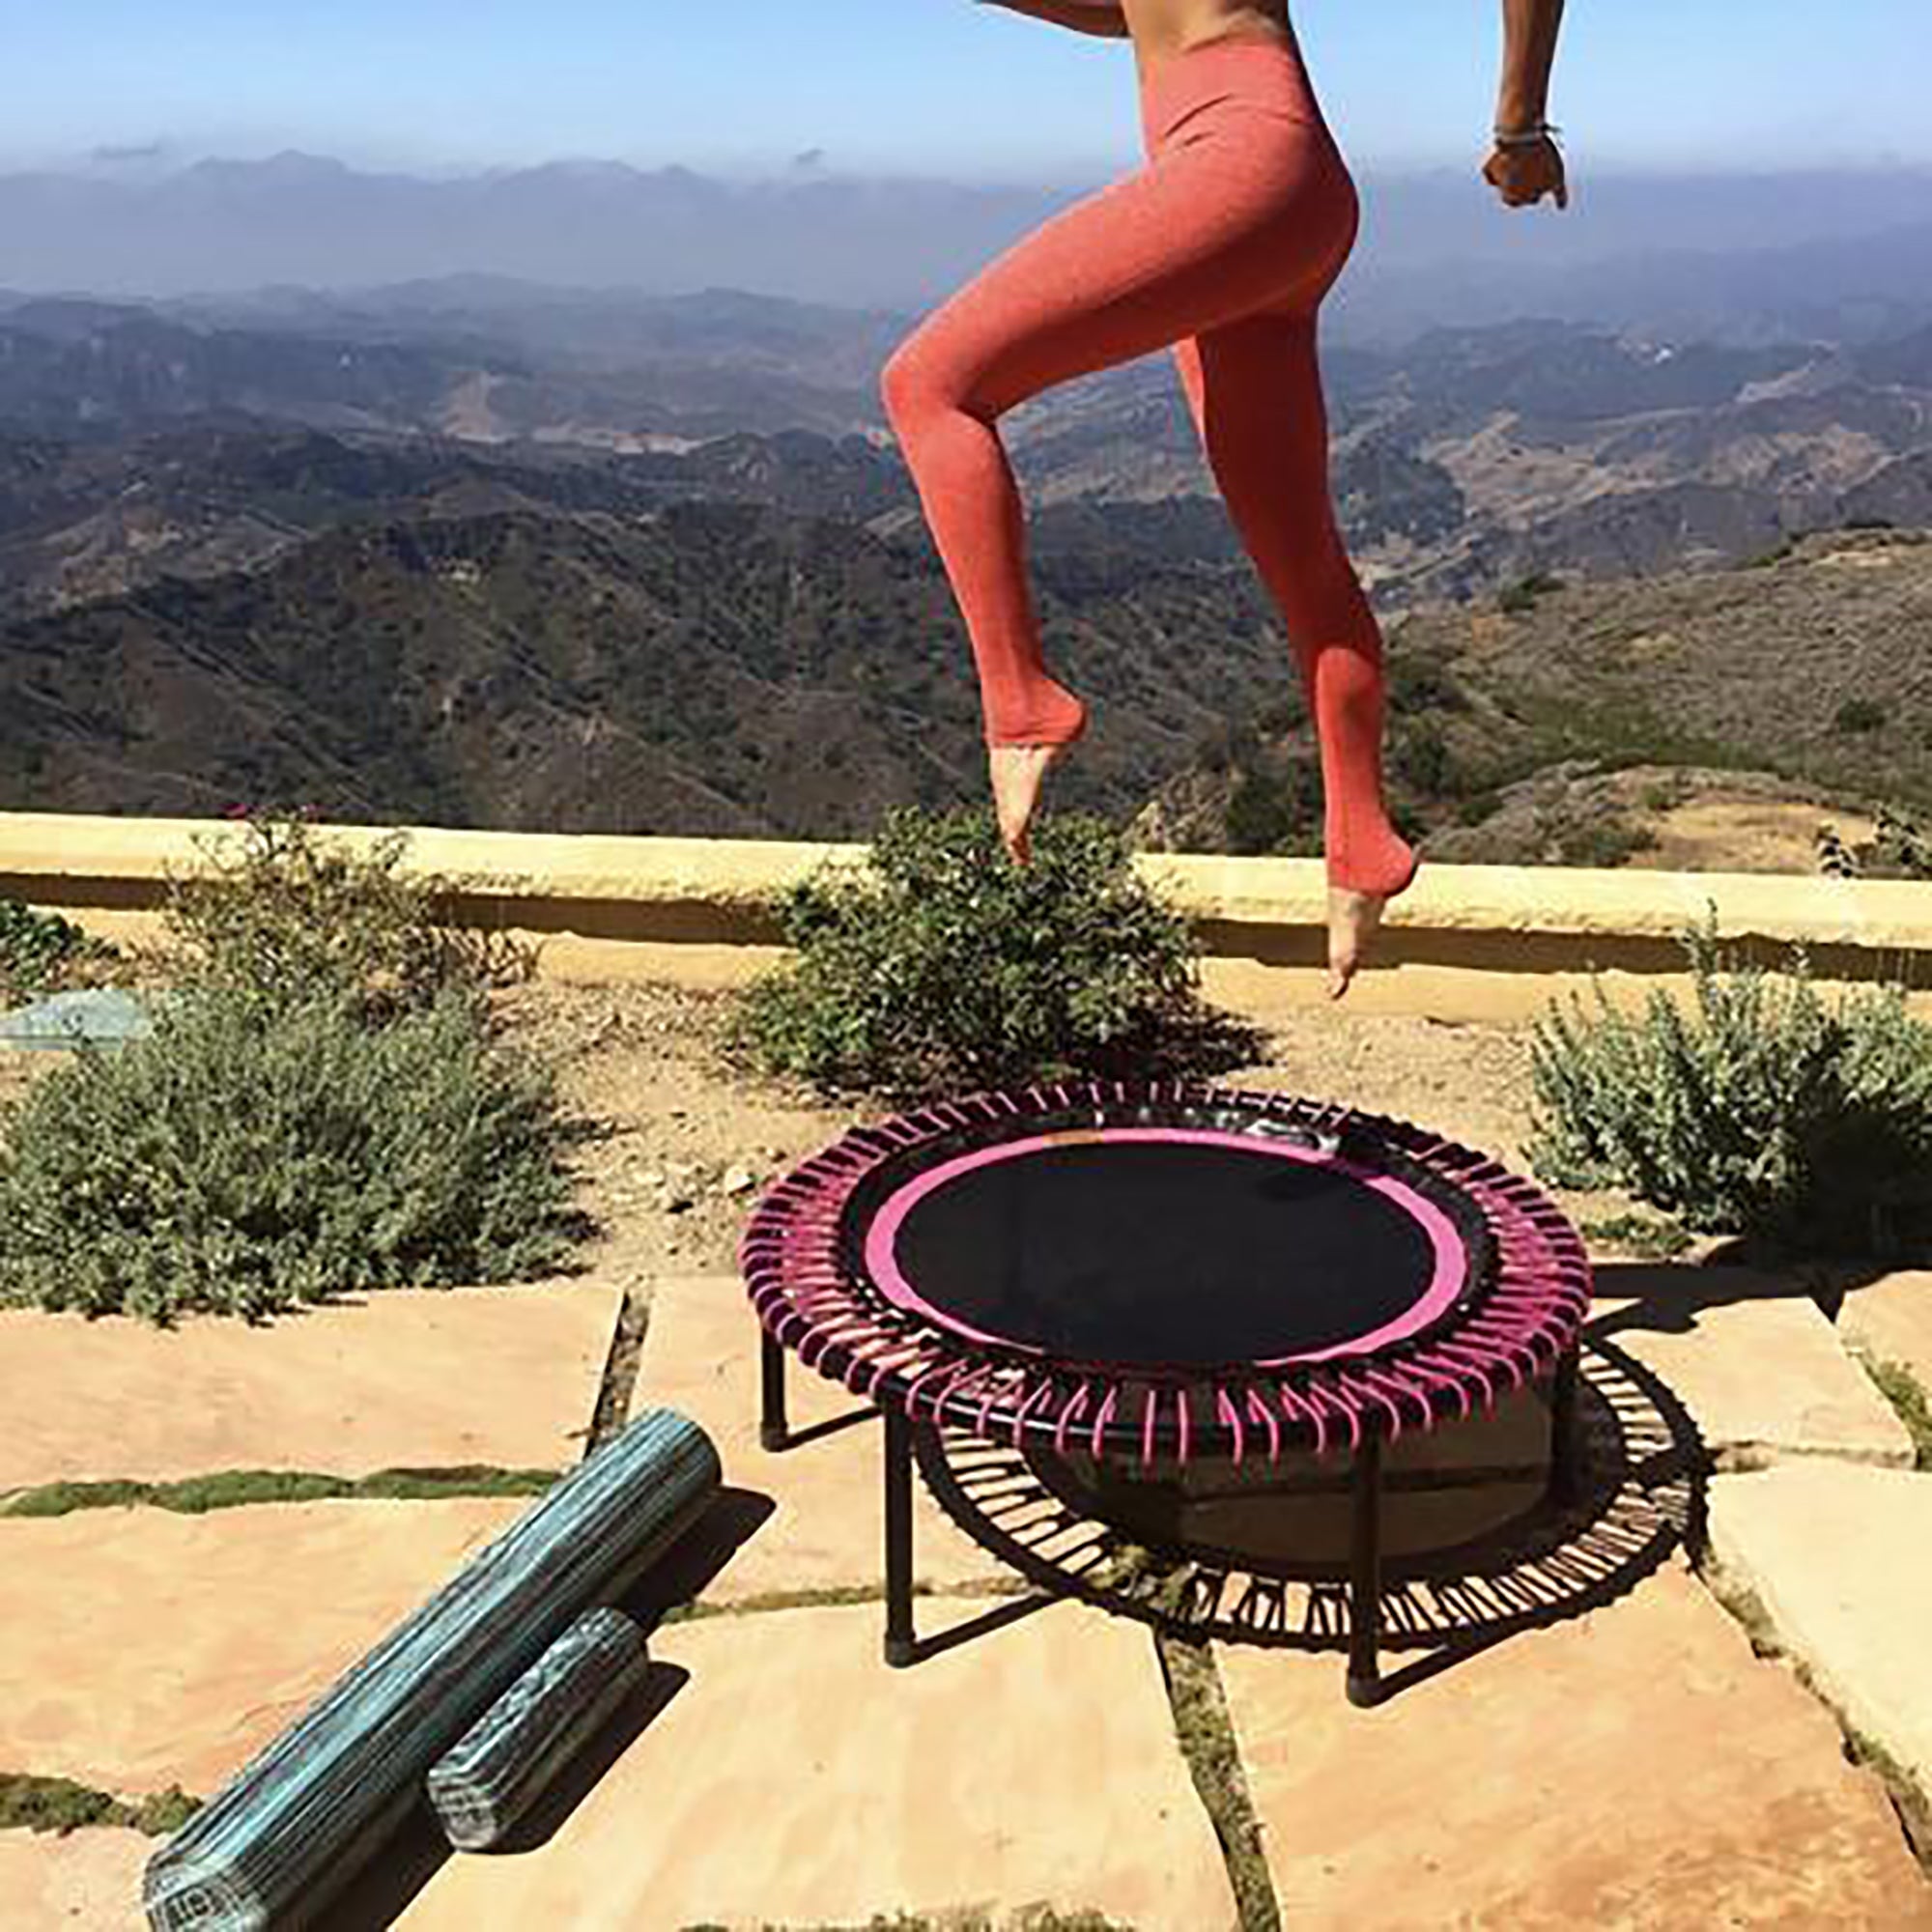 woman jumping on trampoline in the desert